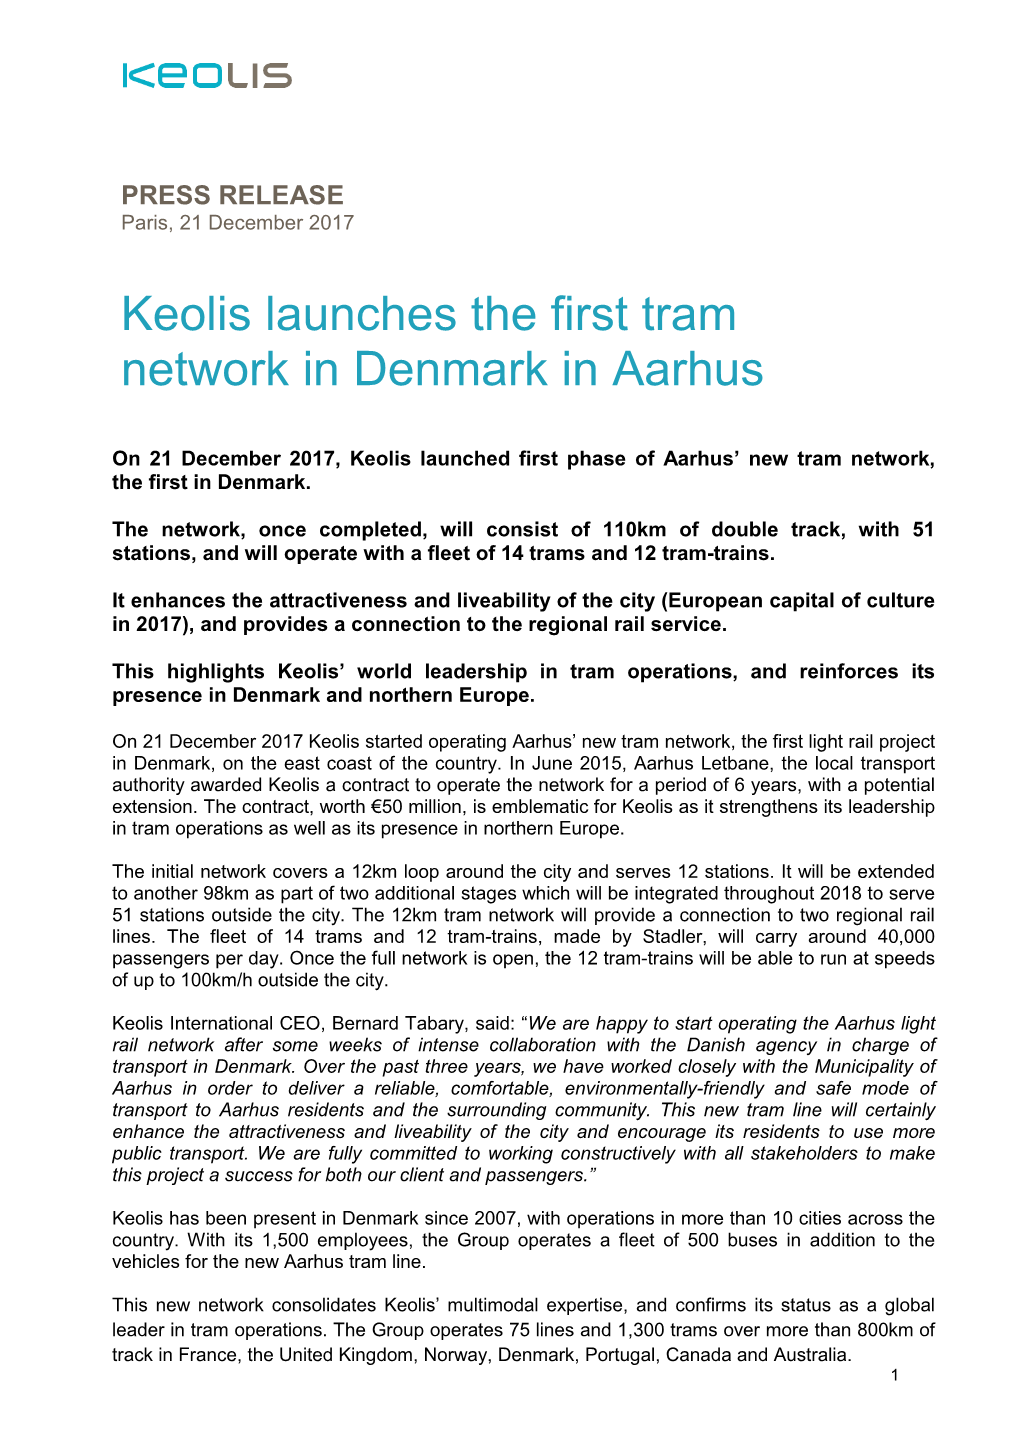 Keolis Launches the First Tram Network in Denmark in Aarhus